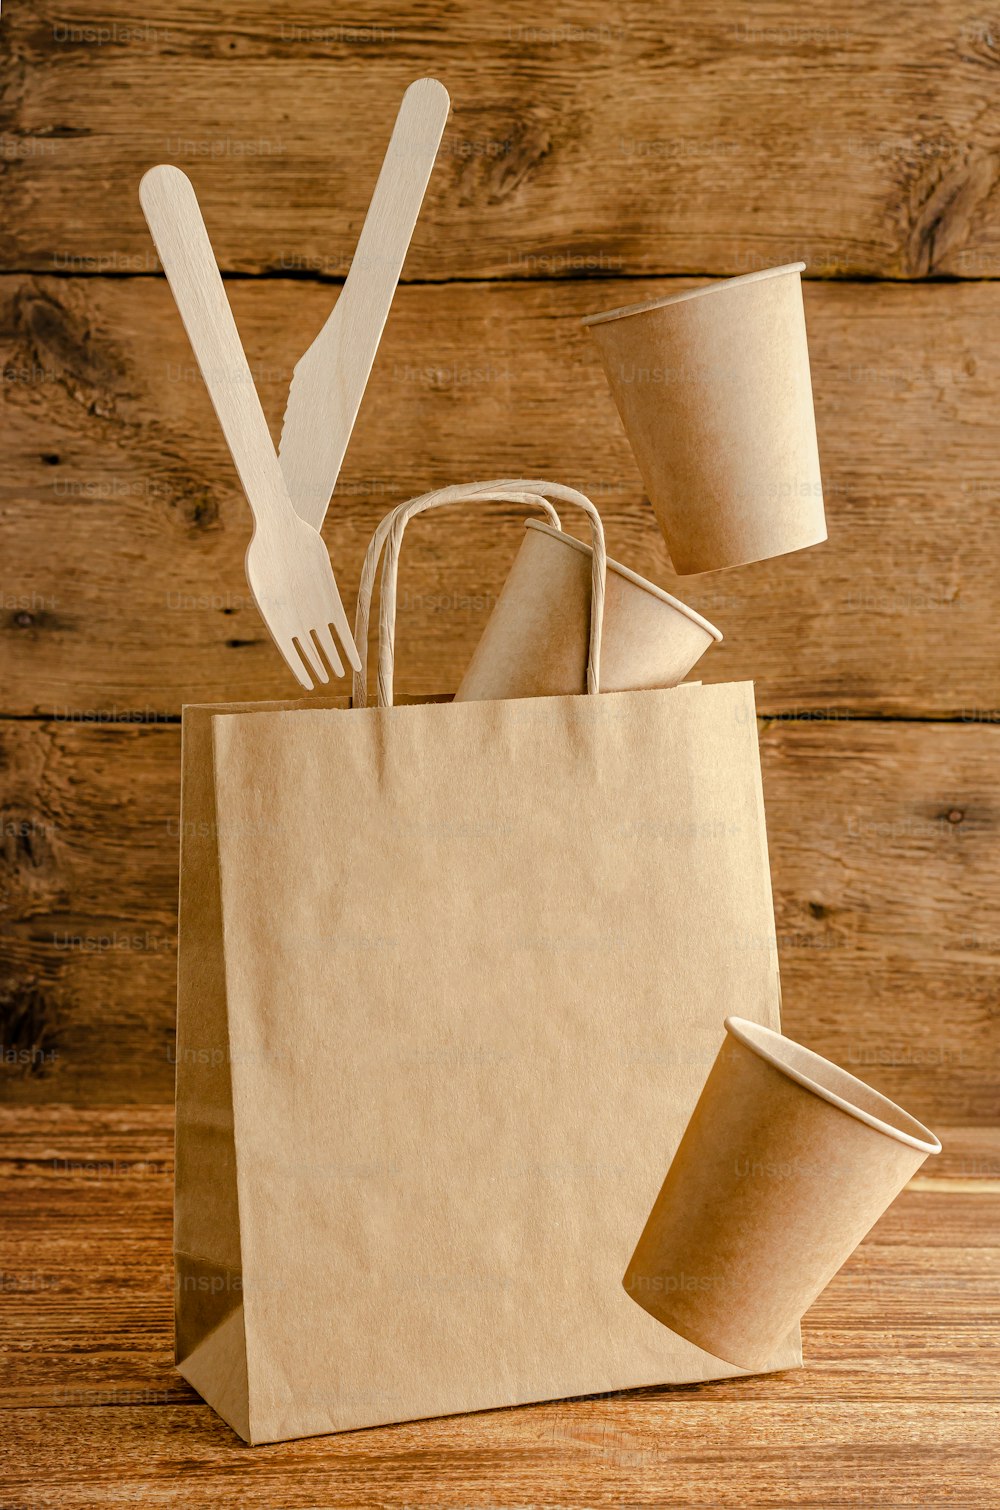 A white paper bag with a hole in it photo – Paper bags Image on Unsplash